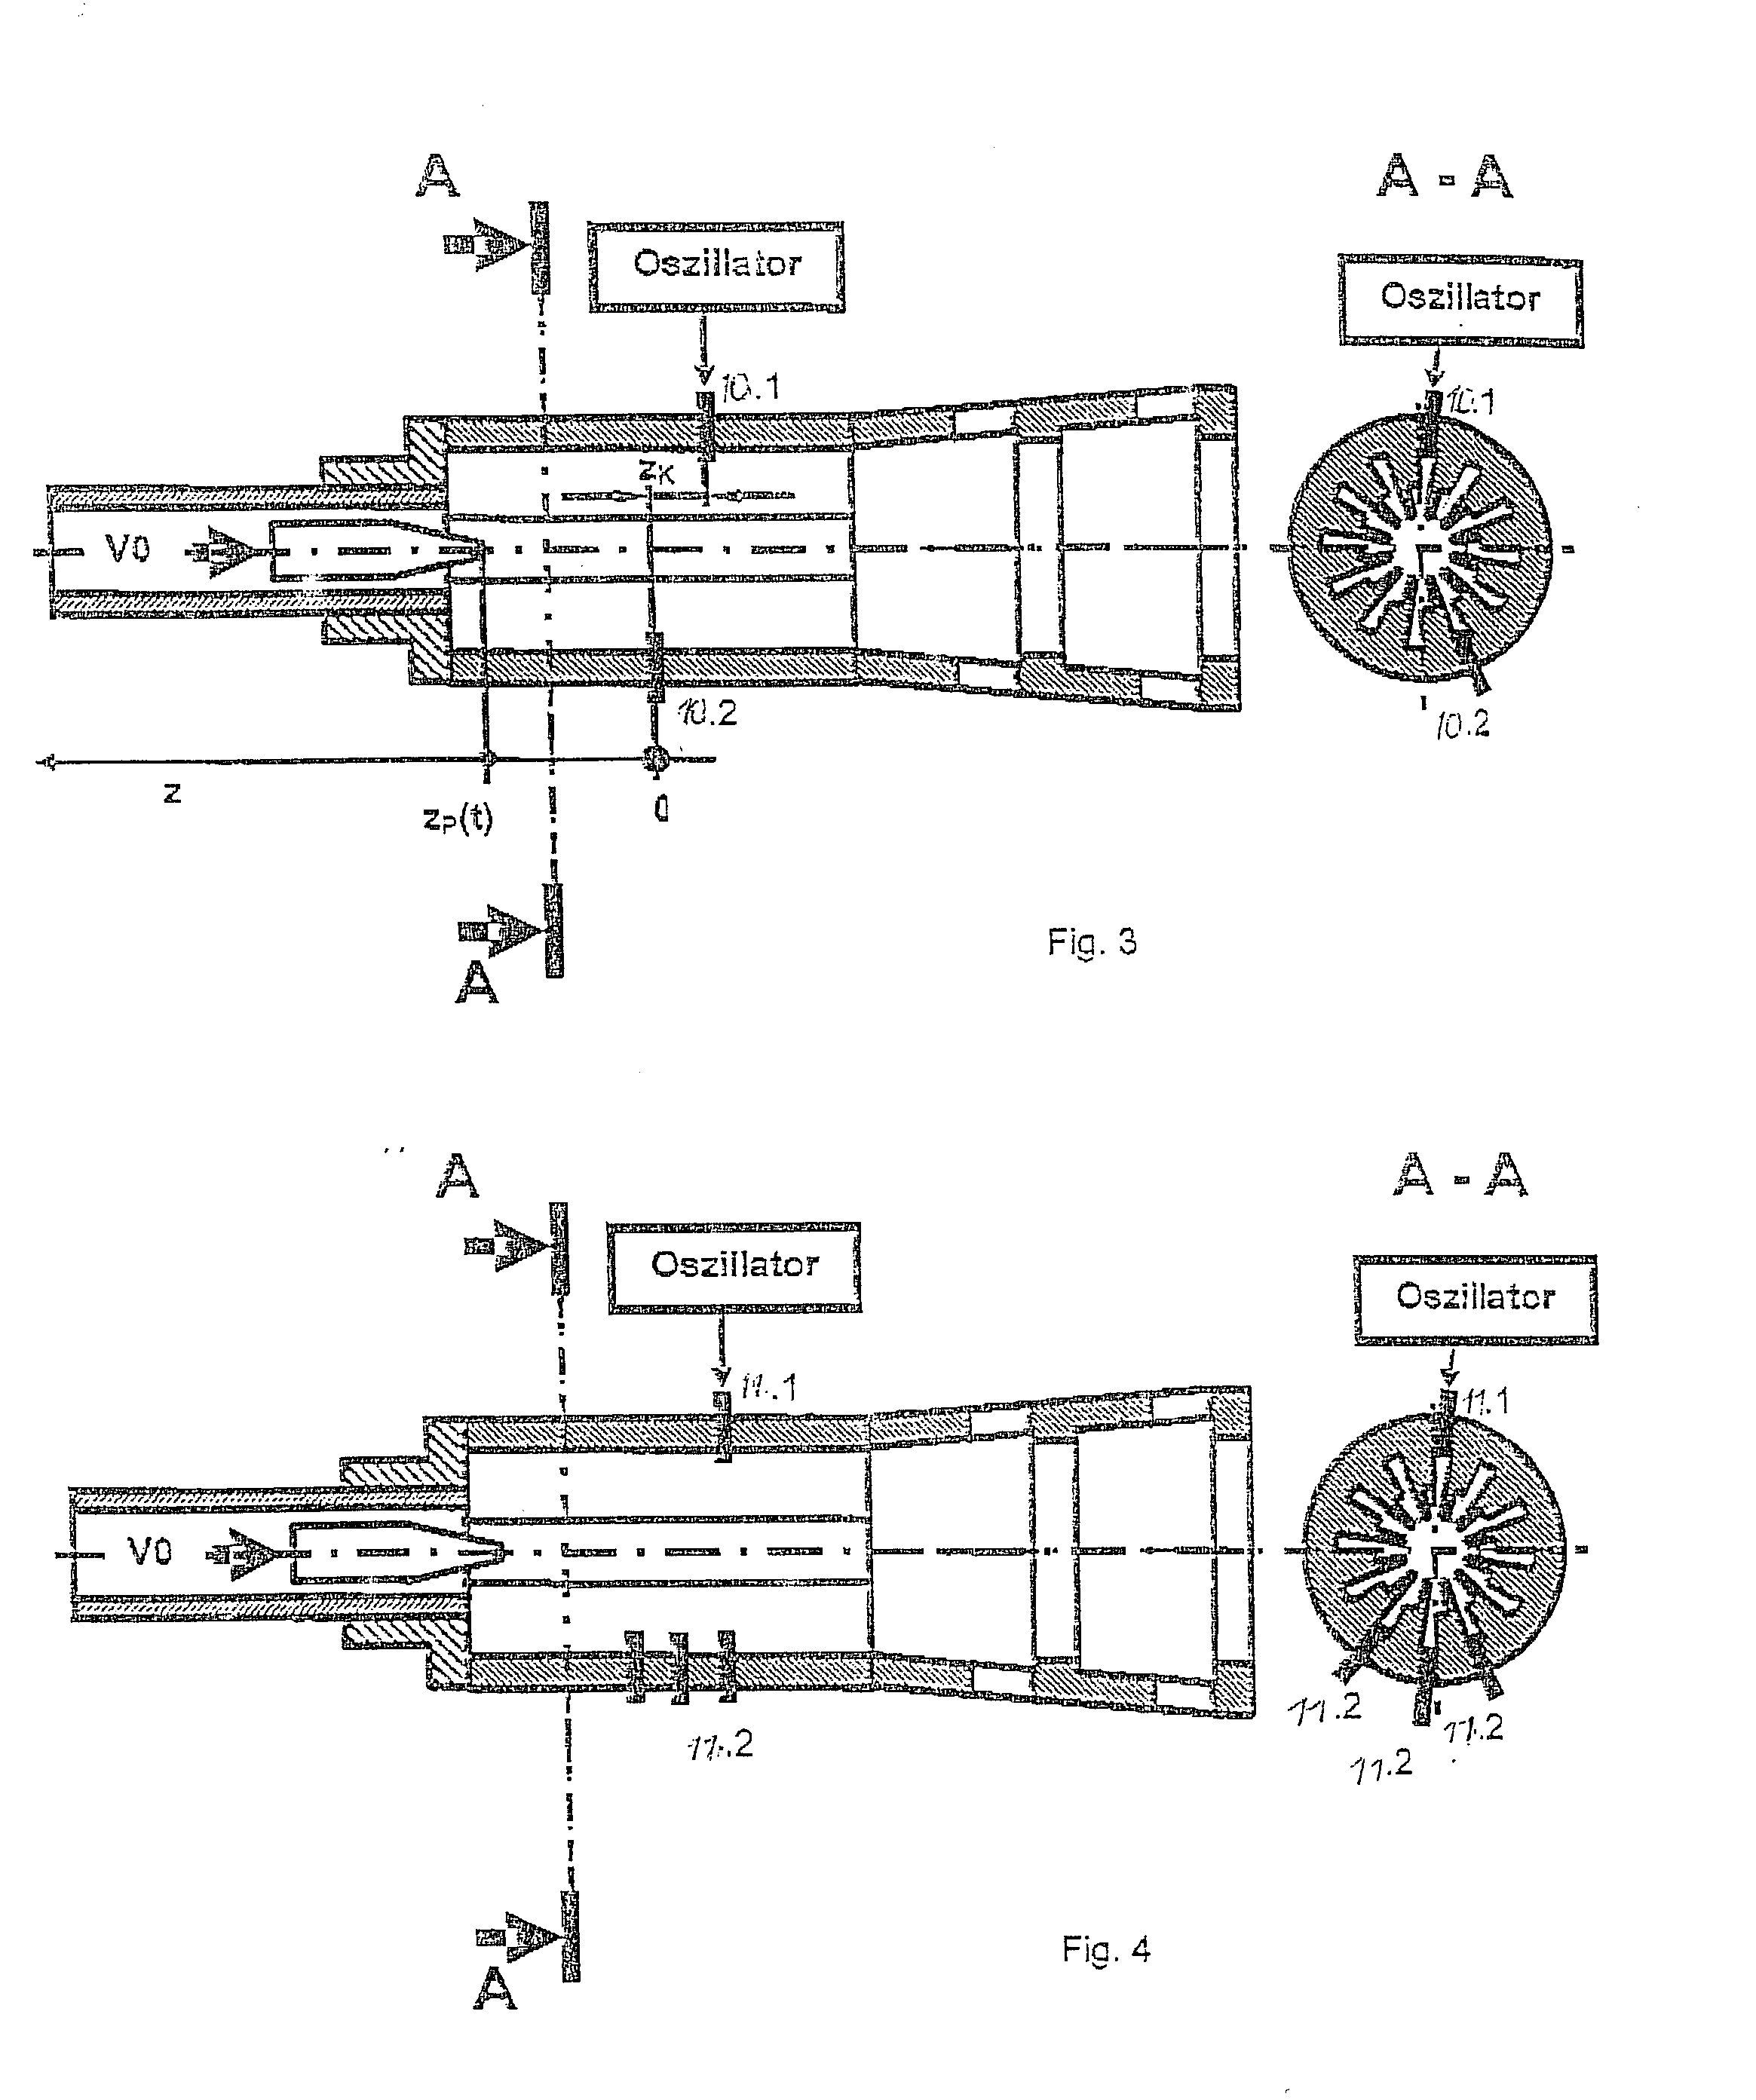 Method for measuring the muzzle velocity of a projectile or the like